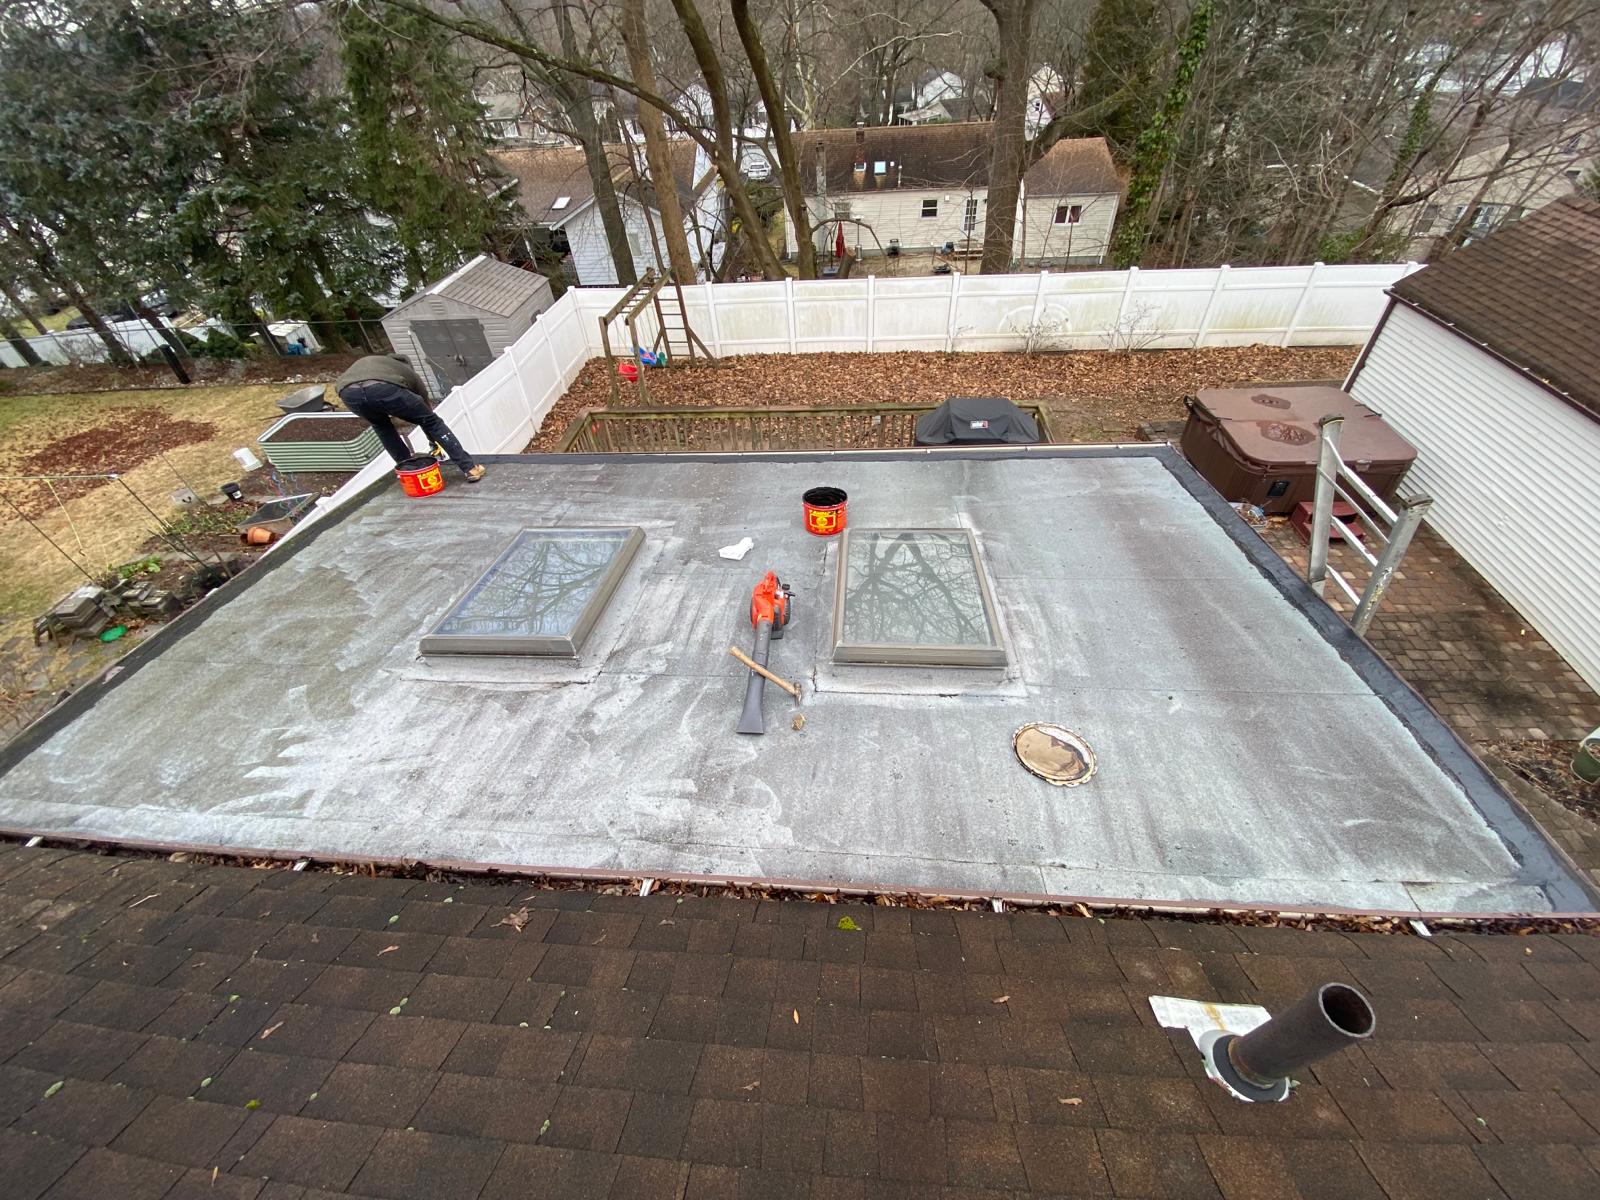 New Flat Roof Installation with Silicone Roof in Paramus NJ Project Shot 2